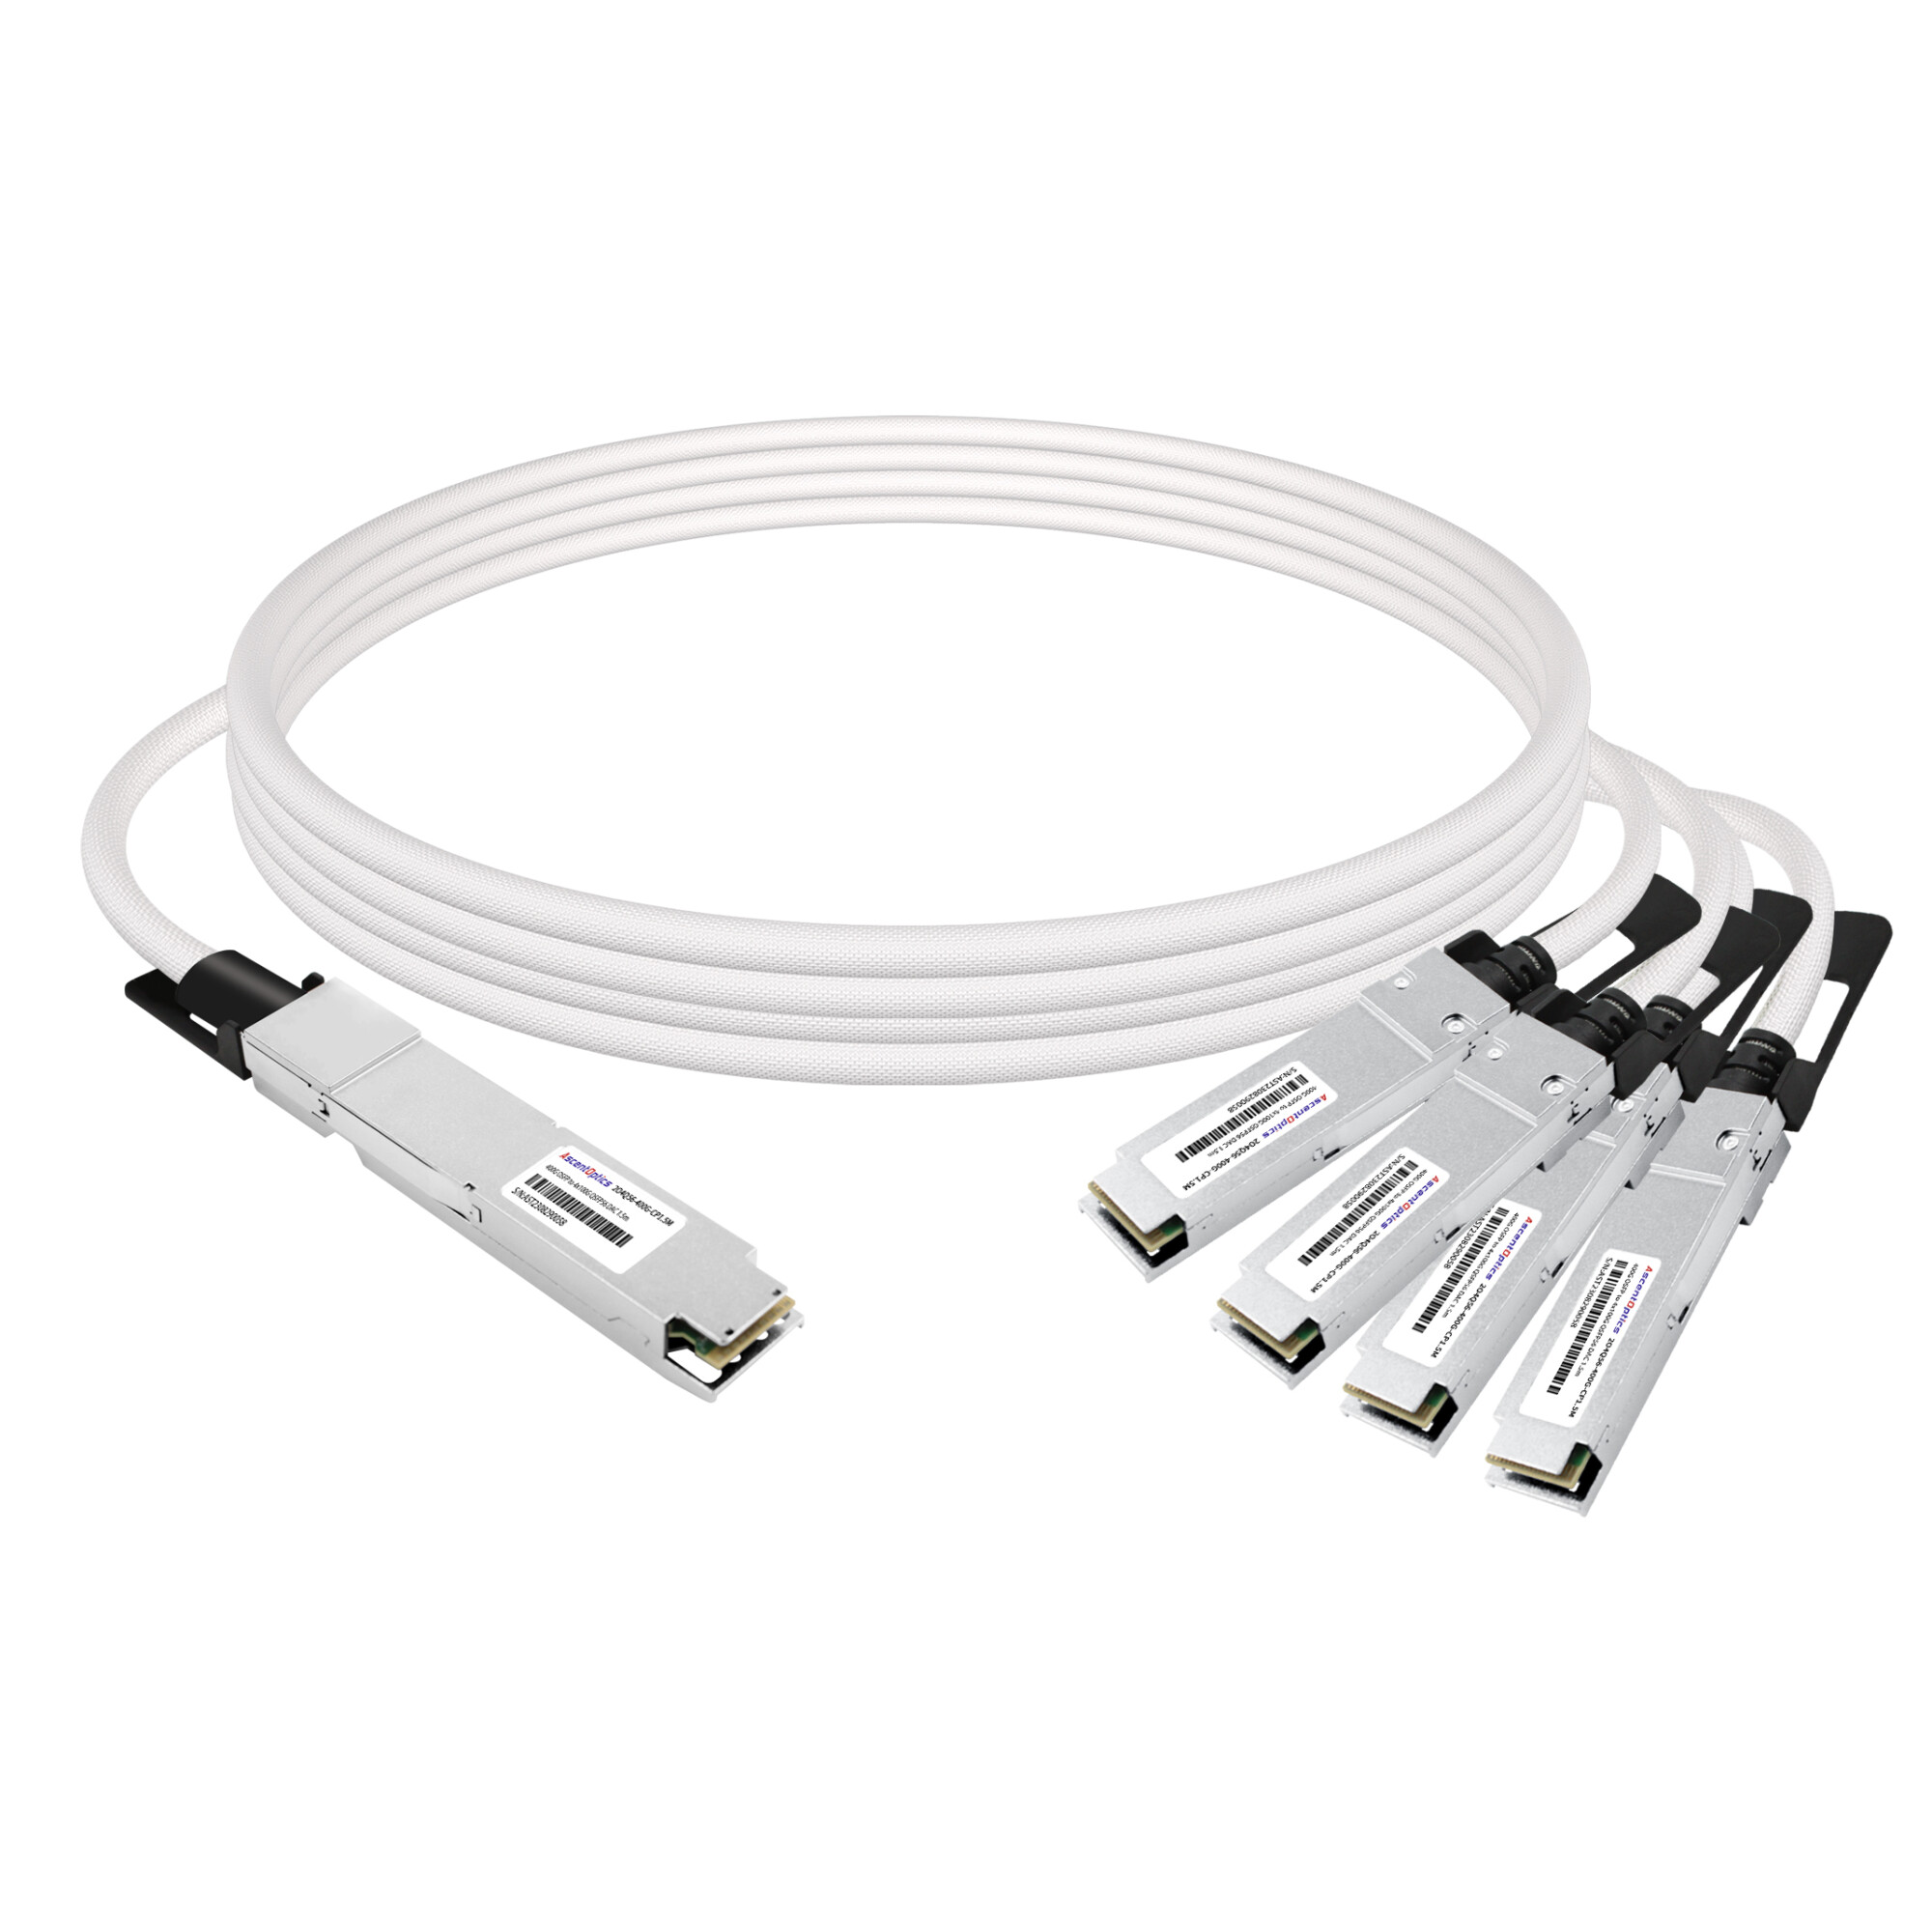 400G OSFP twin port to 4x 100G QSFP56 Copper Breakout Cable,1.5 Meter